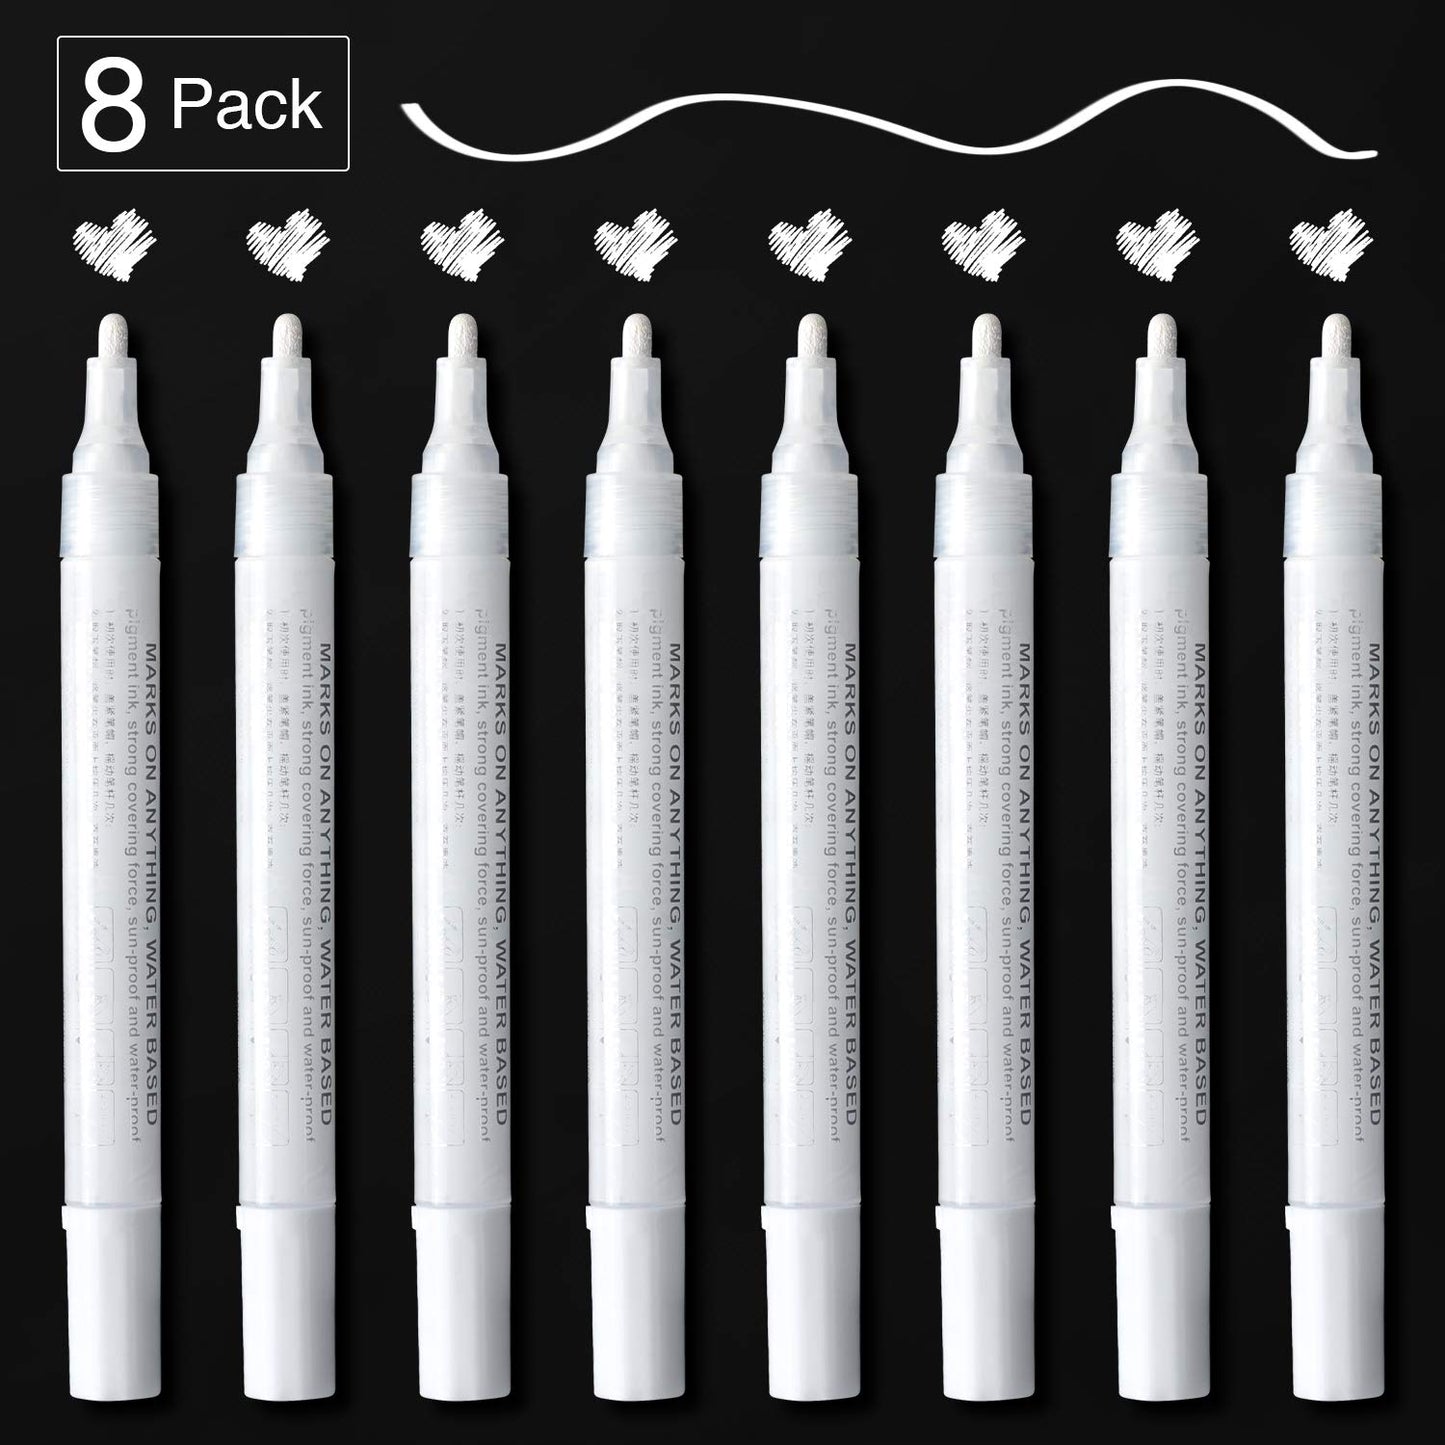 White Paint Pen for Art - 8Pack Acrylic White Paint Marker for Rock Painting, Stone, Wood, Canvas, Glass, Metal, Metallic, Ceramic, Tire, Graffiti,